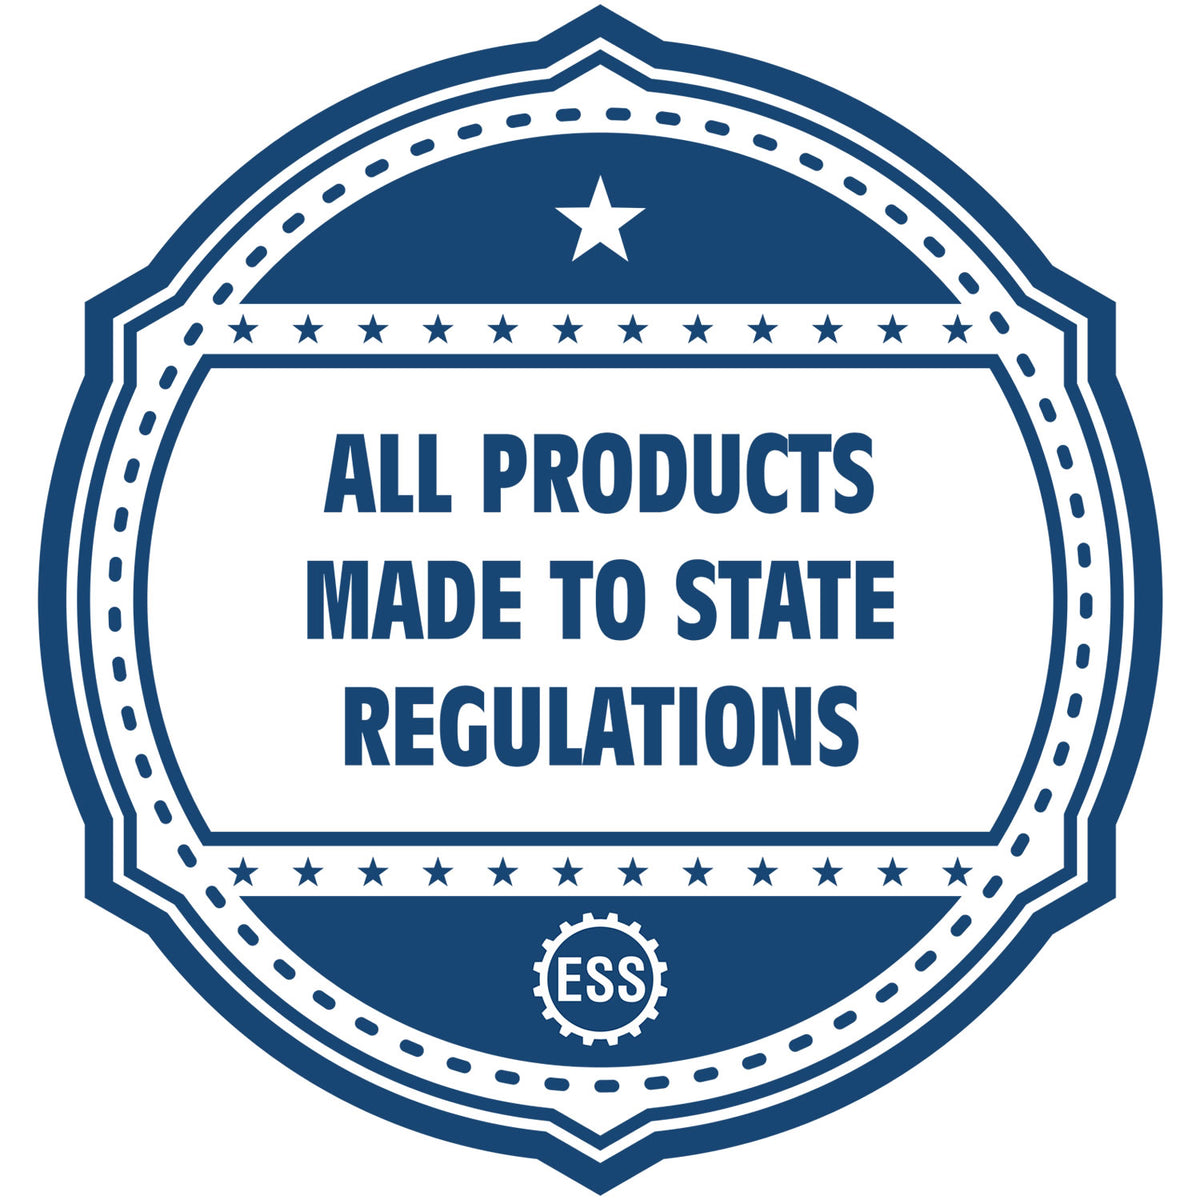 A blue icon or badge for the Hybrid Idaho Architect Seal showing that this product is made in compliance with state regulations.